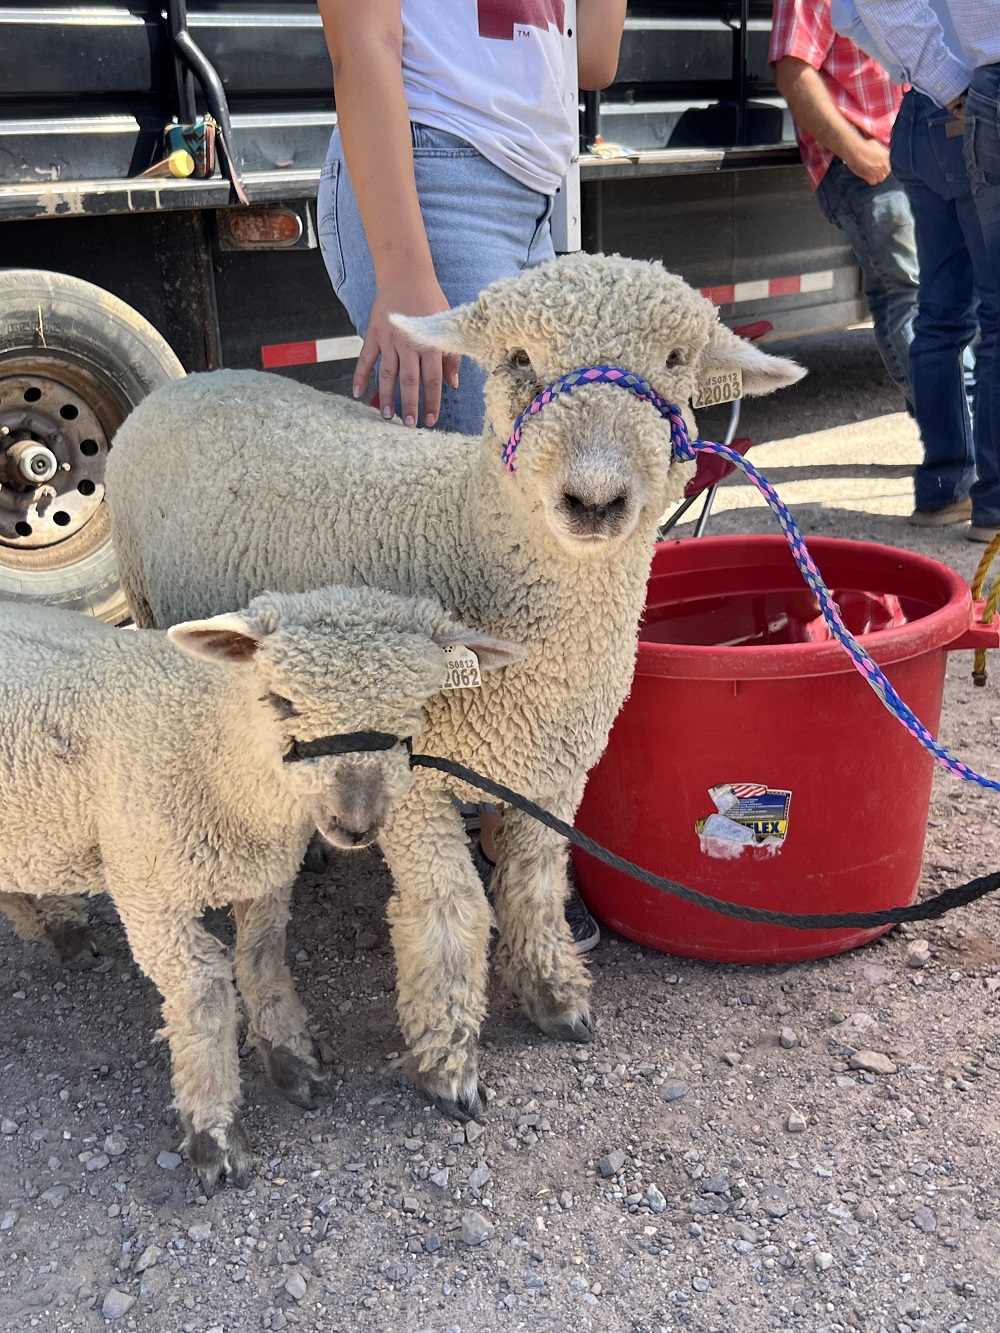 two small sheep next to a red bucket full of water.